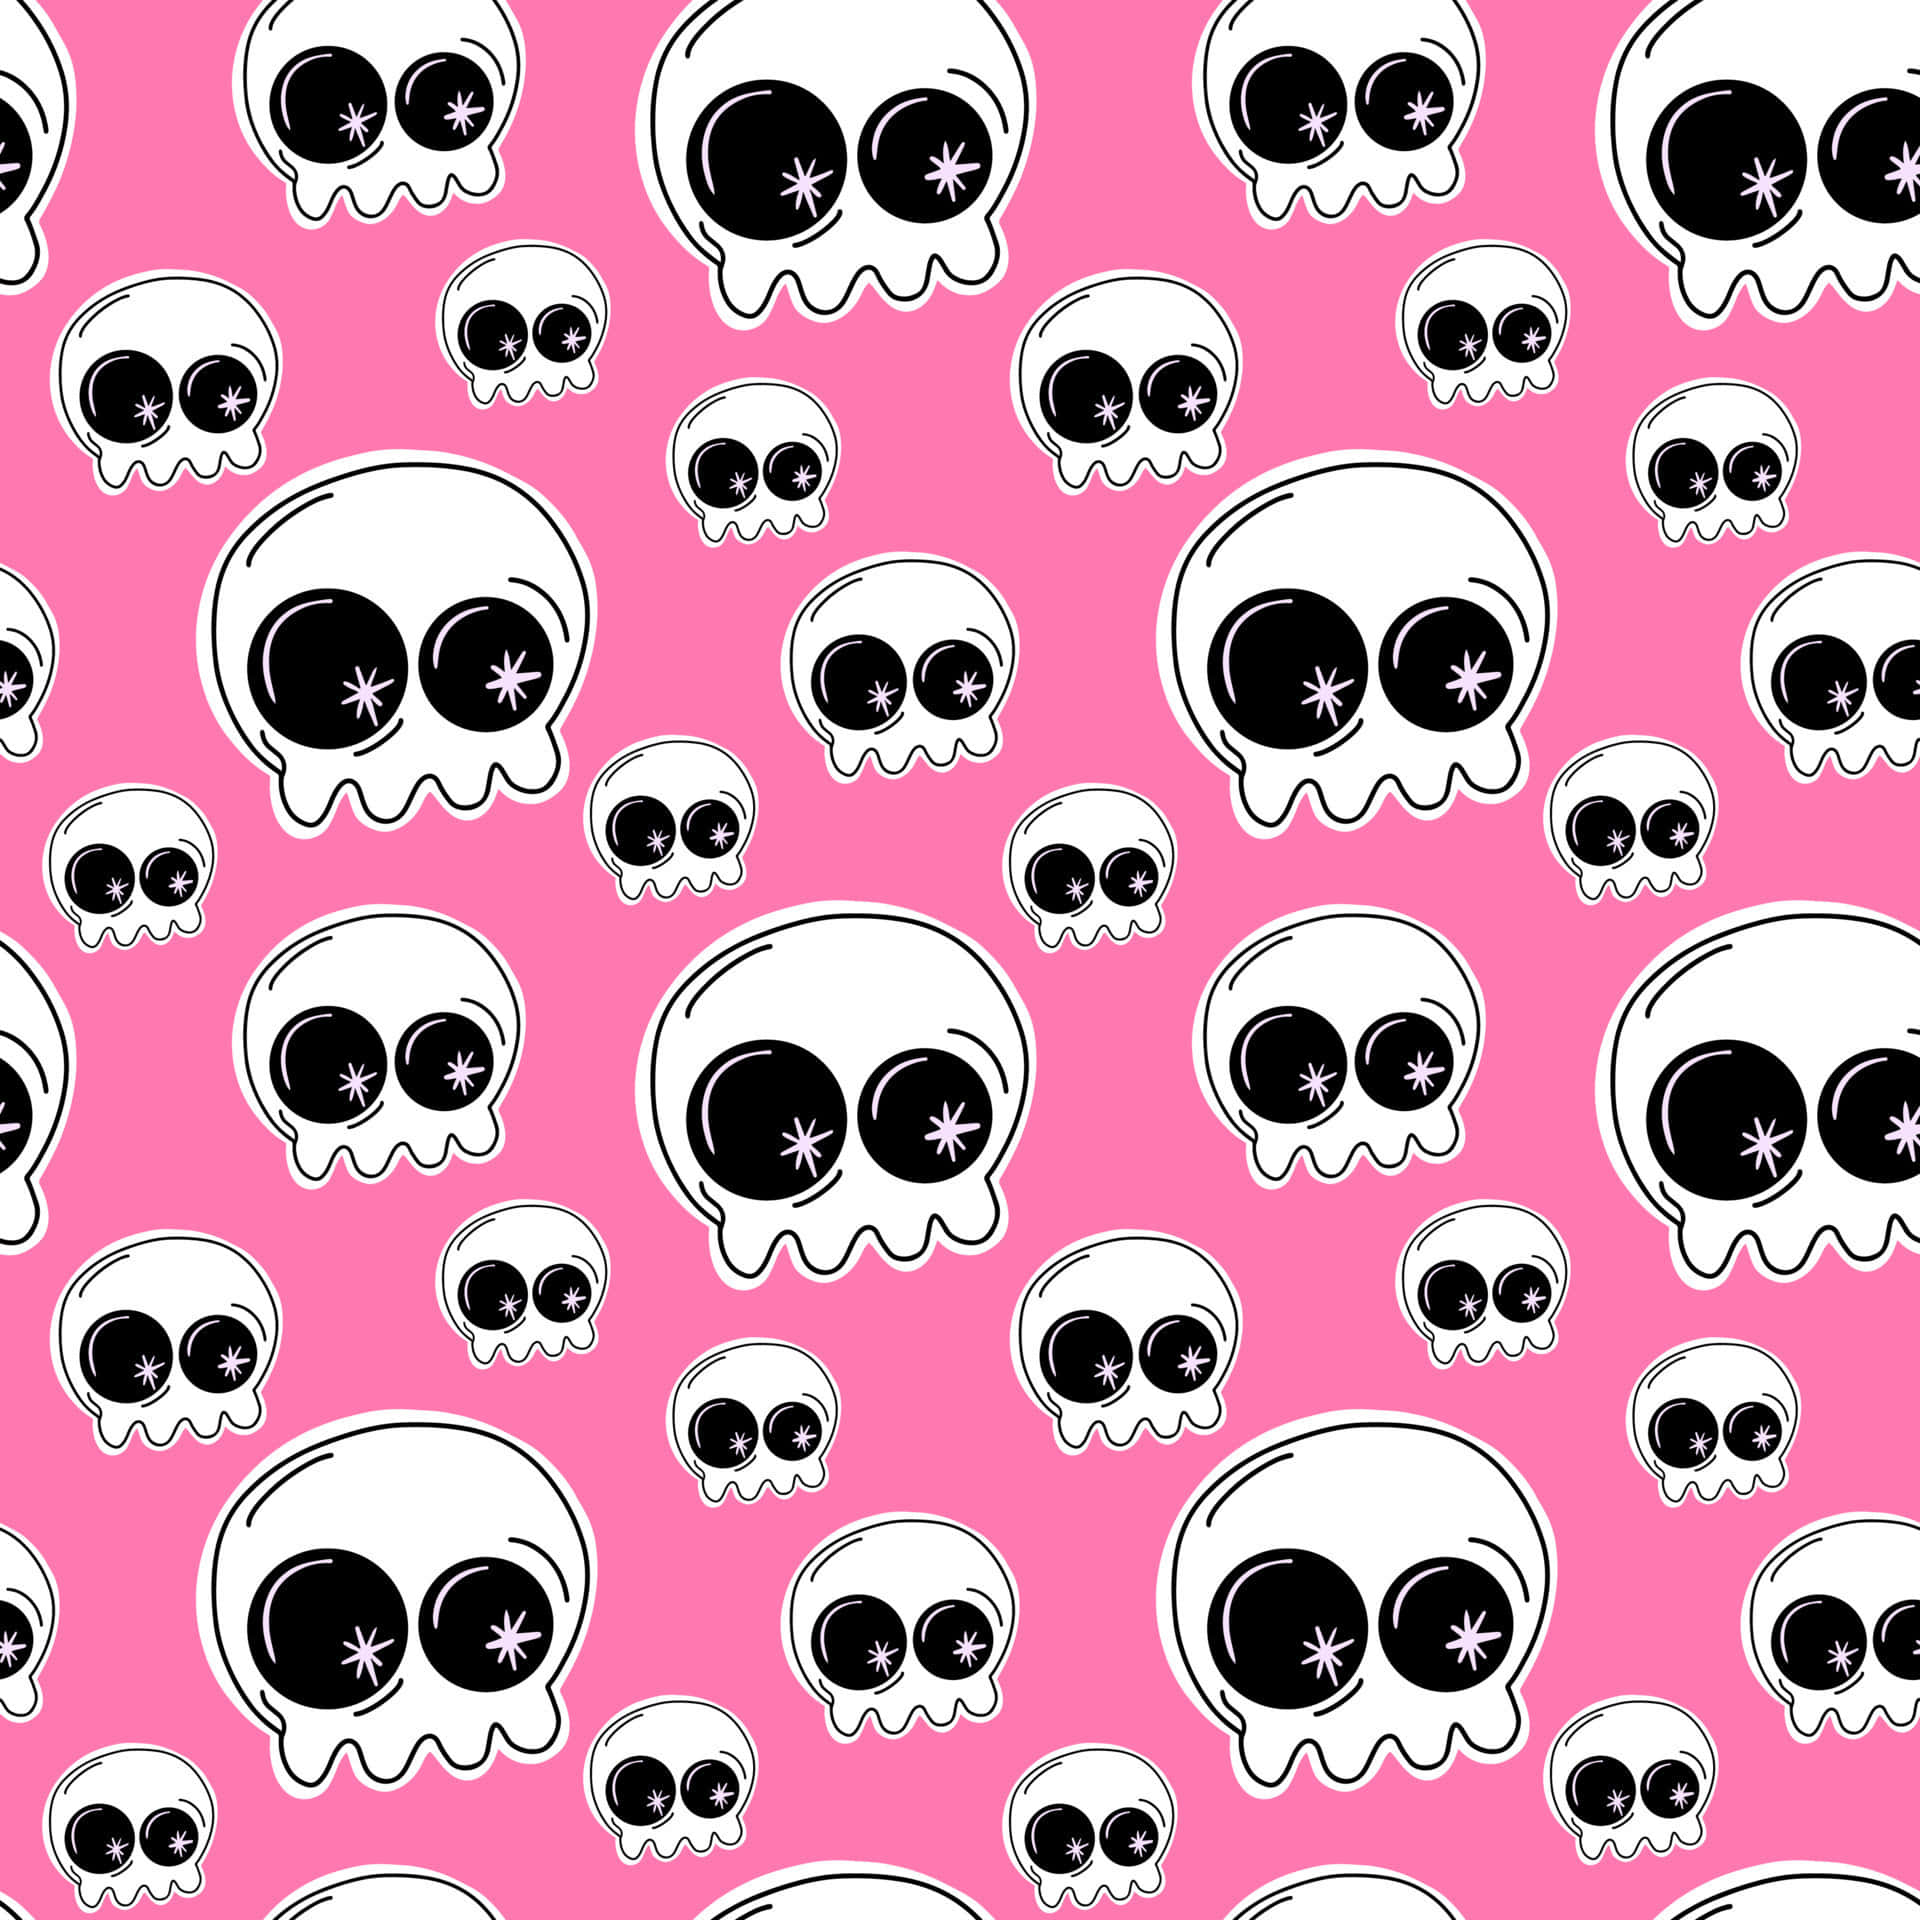 A spooky pink Halloween background.